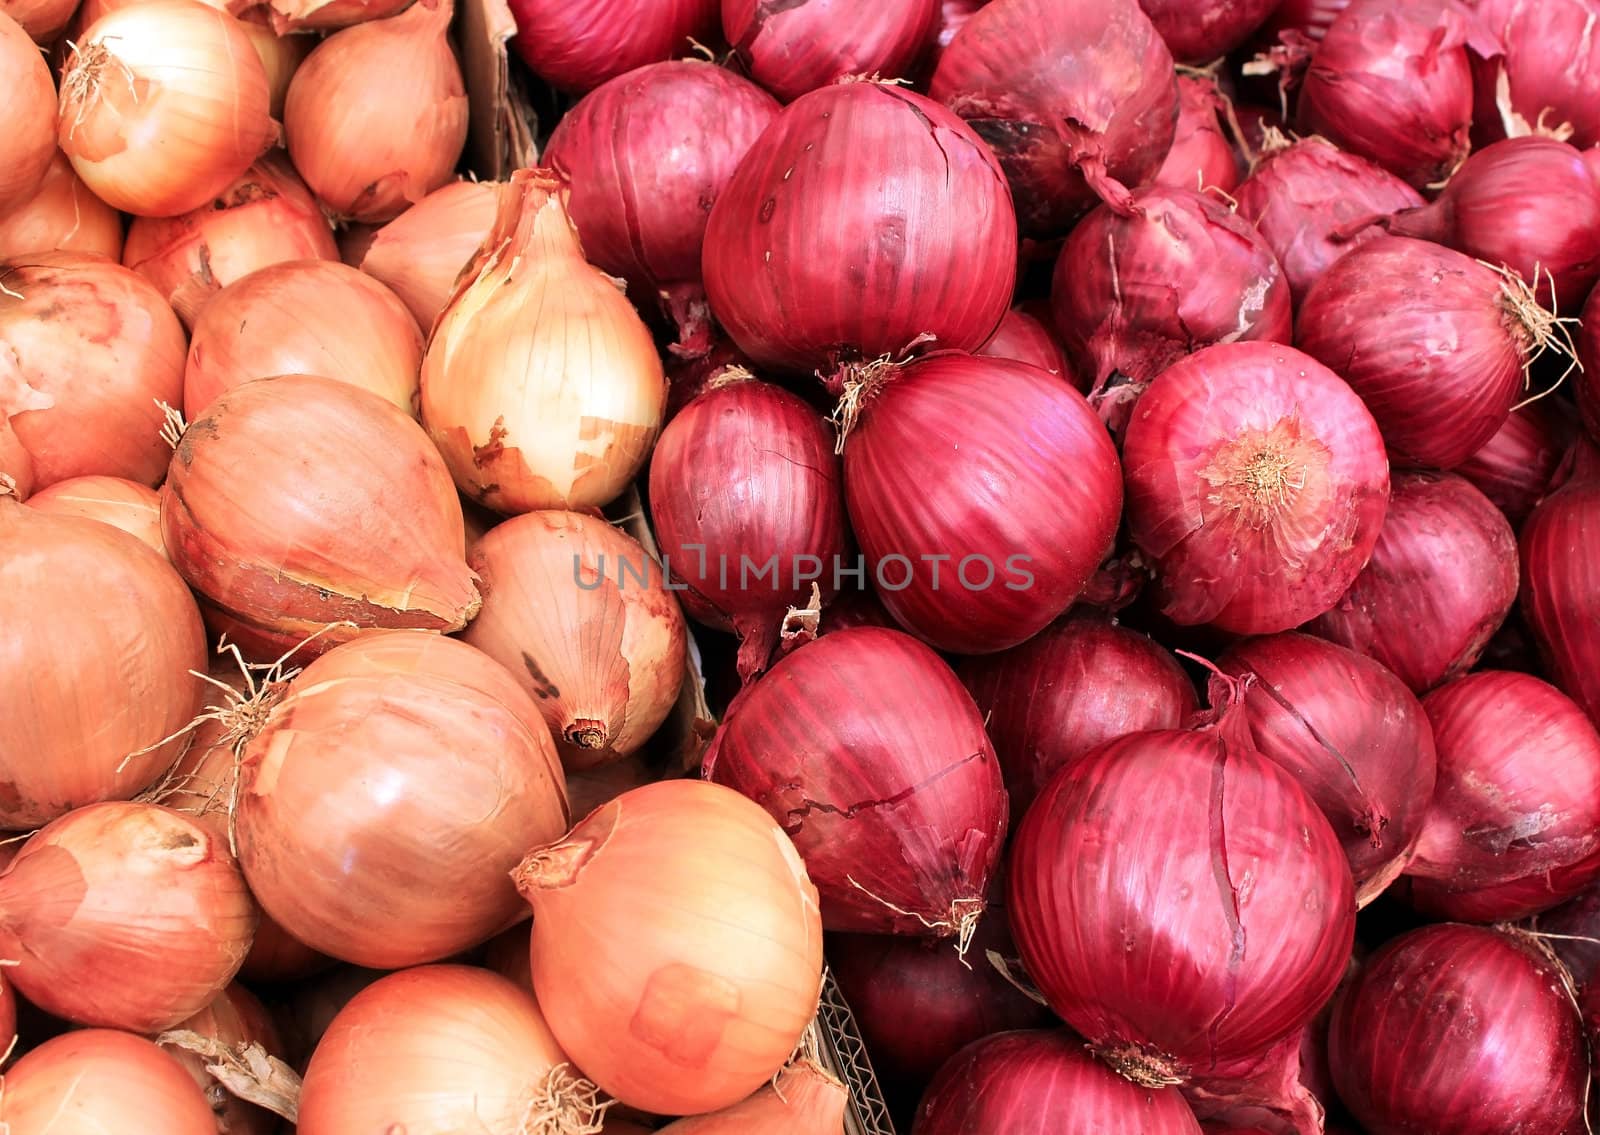 white and red onions by irisphoto4